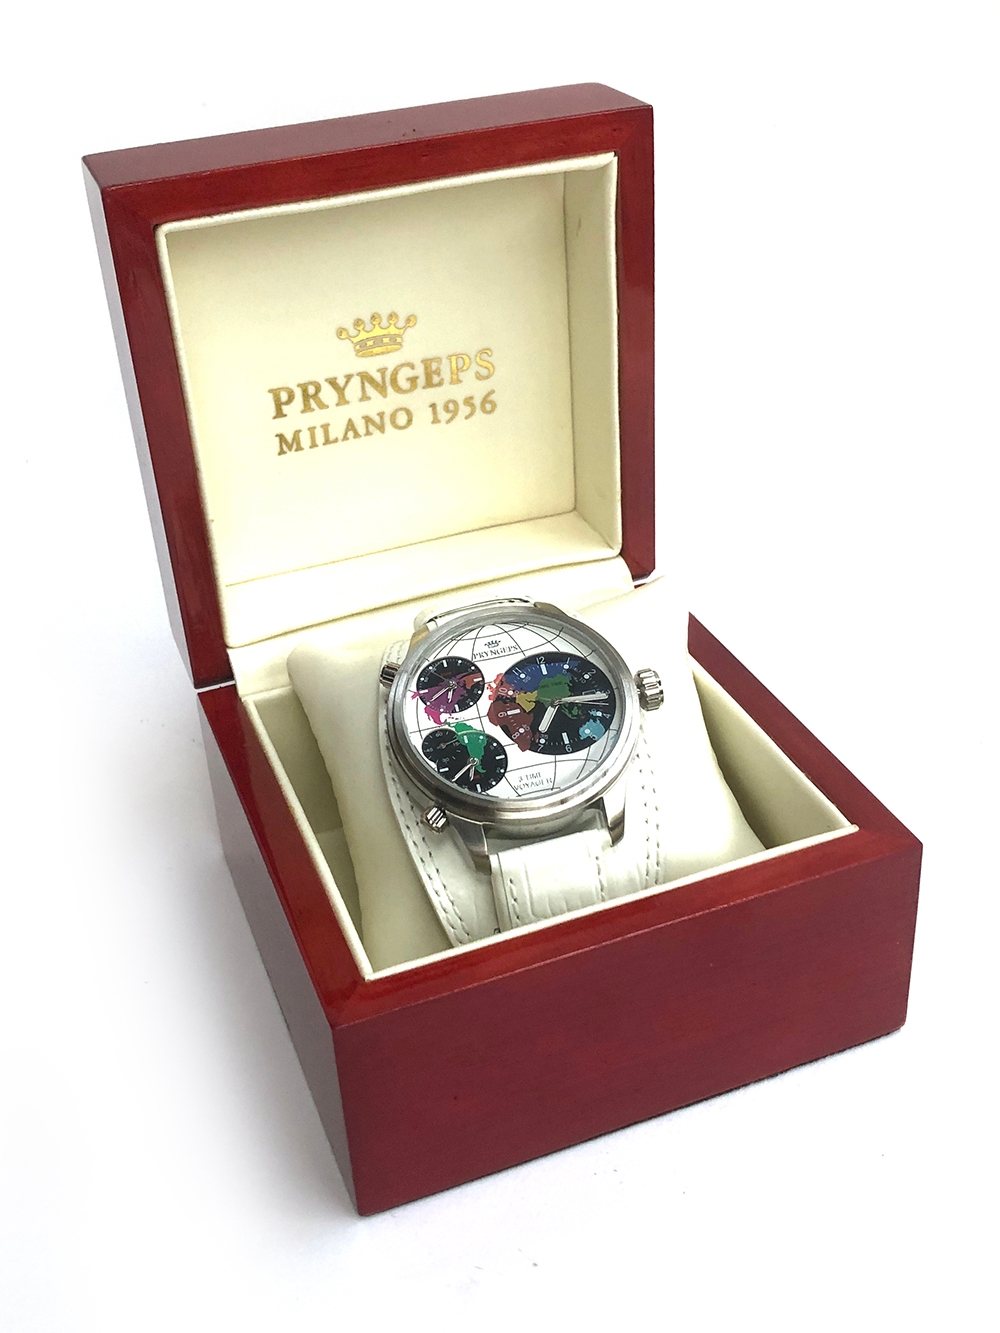 A Pryngeps 3 Time Voyager stainless steel wrist watch, the white dial with four subsidiary dials